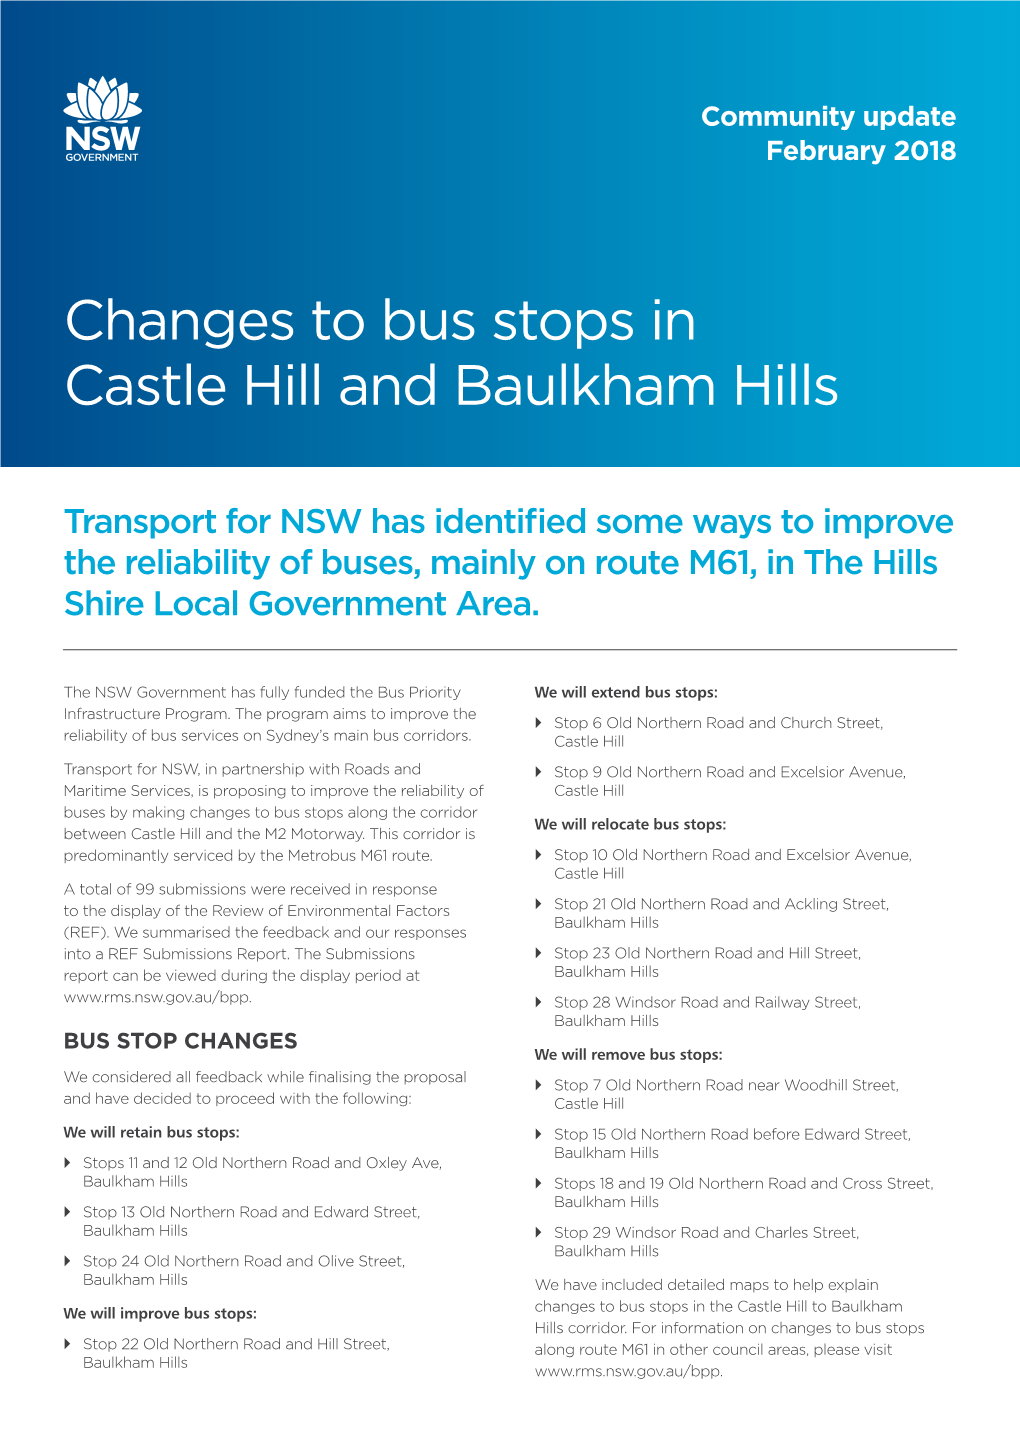 Changes to Bus Stops in Castle Hill and Baulkham Hills